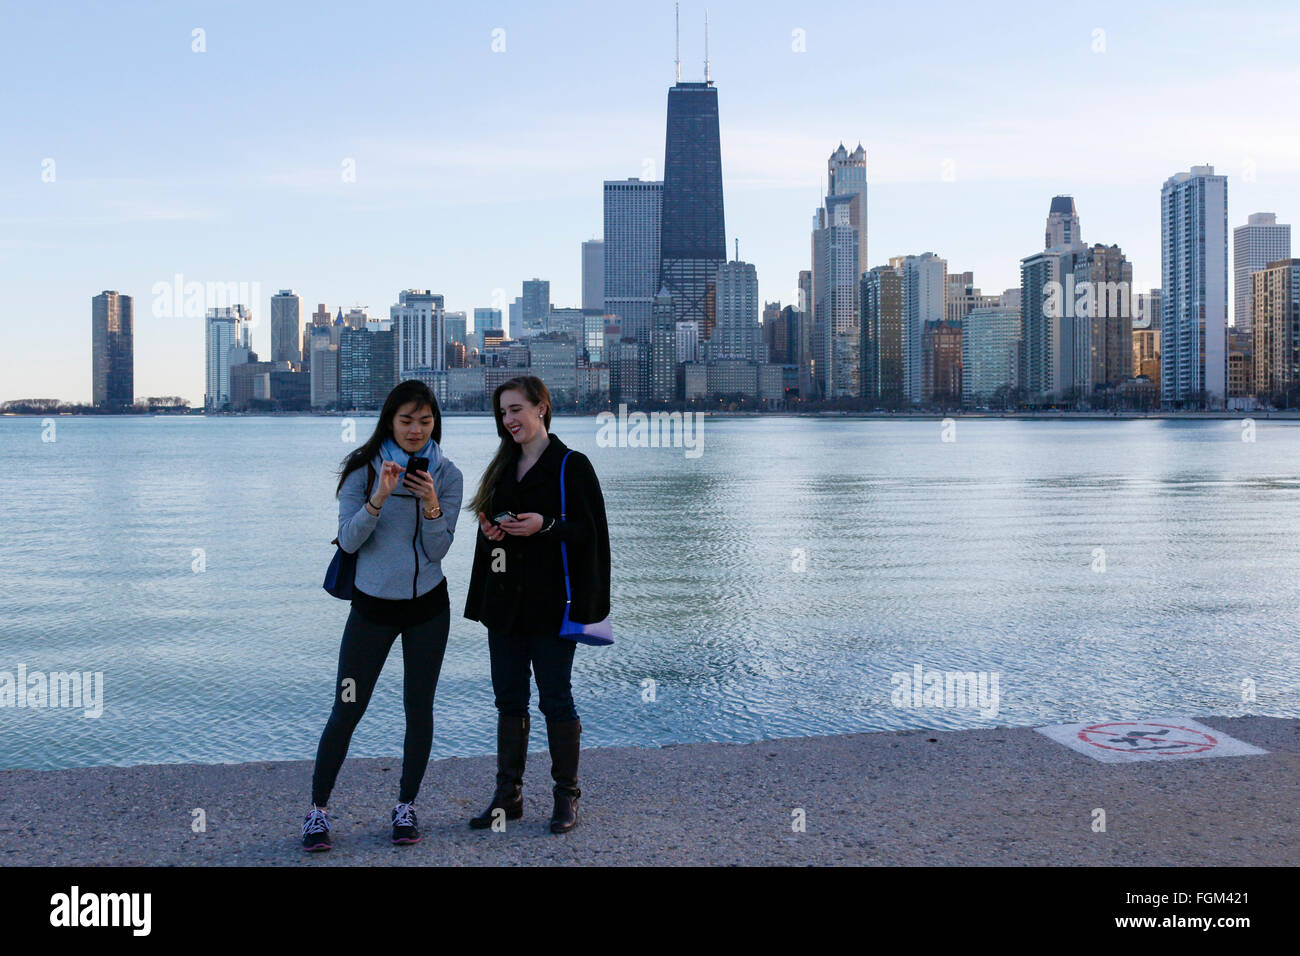 Chicago, USA 20th February 2016. Two young women on the North Avenue Beach Seawall. Chicagoans and visitors alike came to the city's lakeshore to enjoy an unseasonably warm day with temperatures over 60ºF/15ºC. The high winds that blasted the city yesterday subsided to a gentle breeze. Credit:  Todd Bannor/Alamy Live News Stock Photo